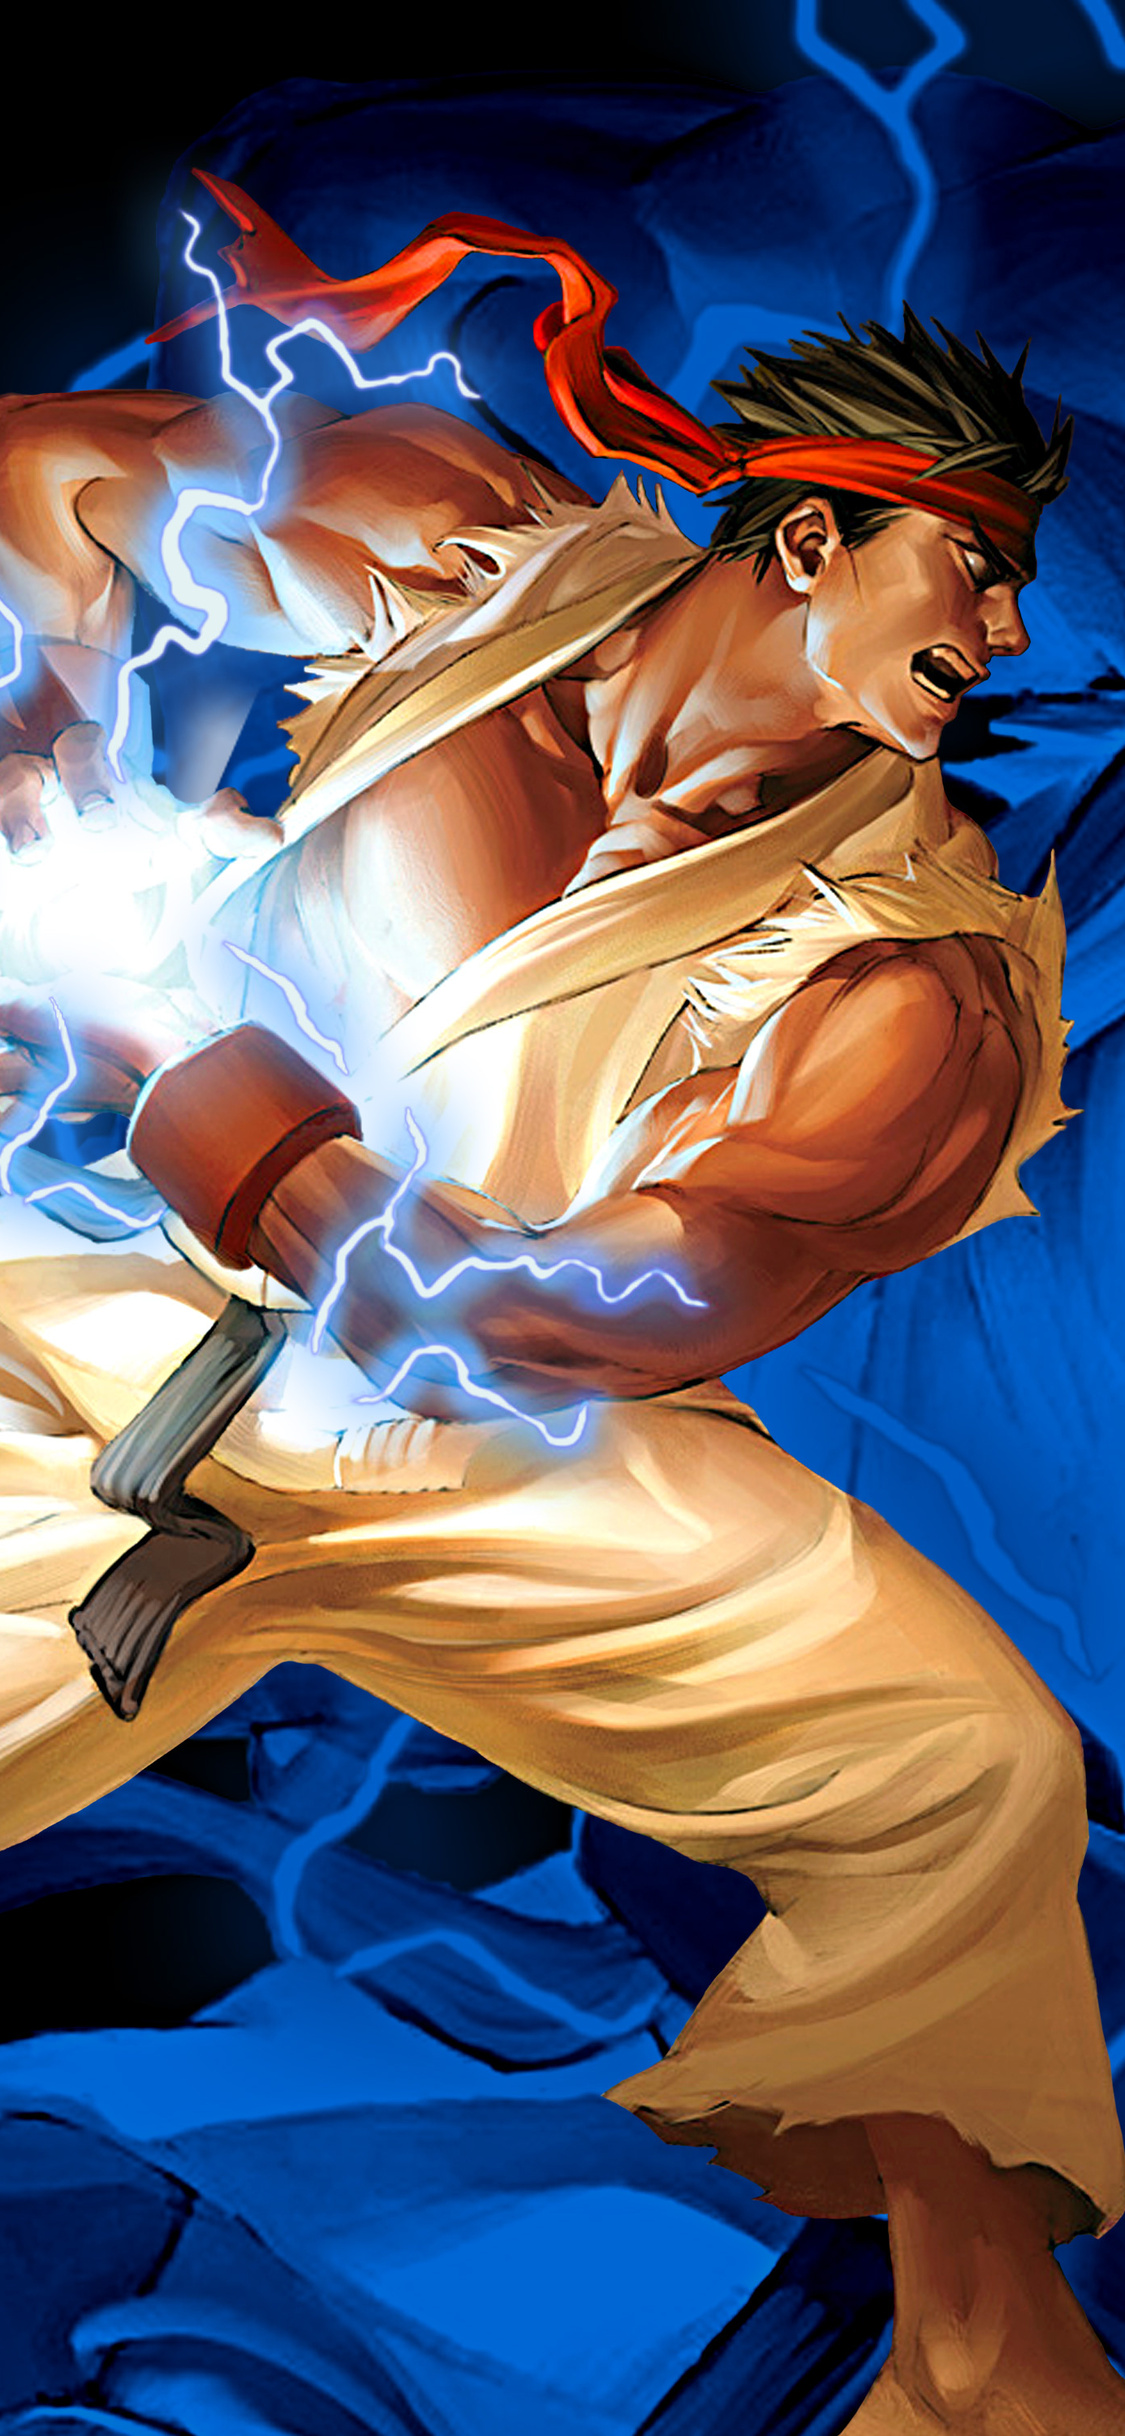 Street Fighter 2 Wallpapers